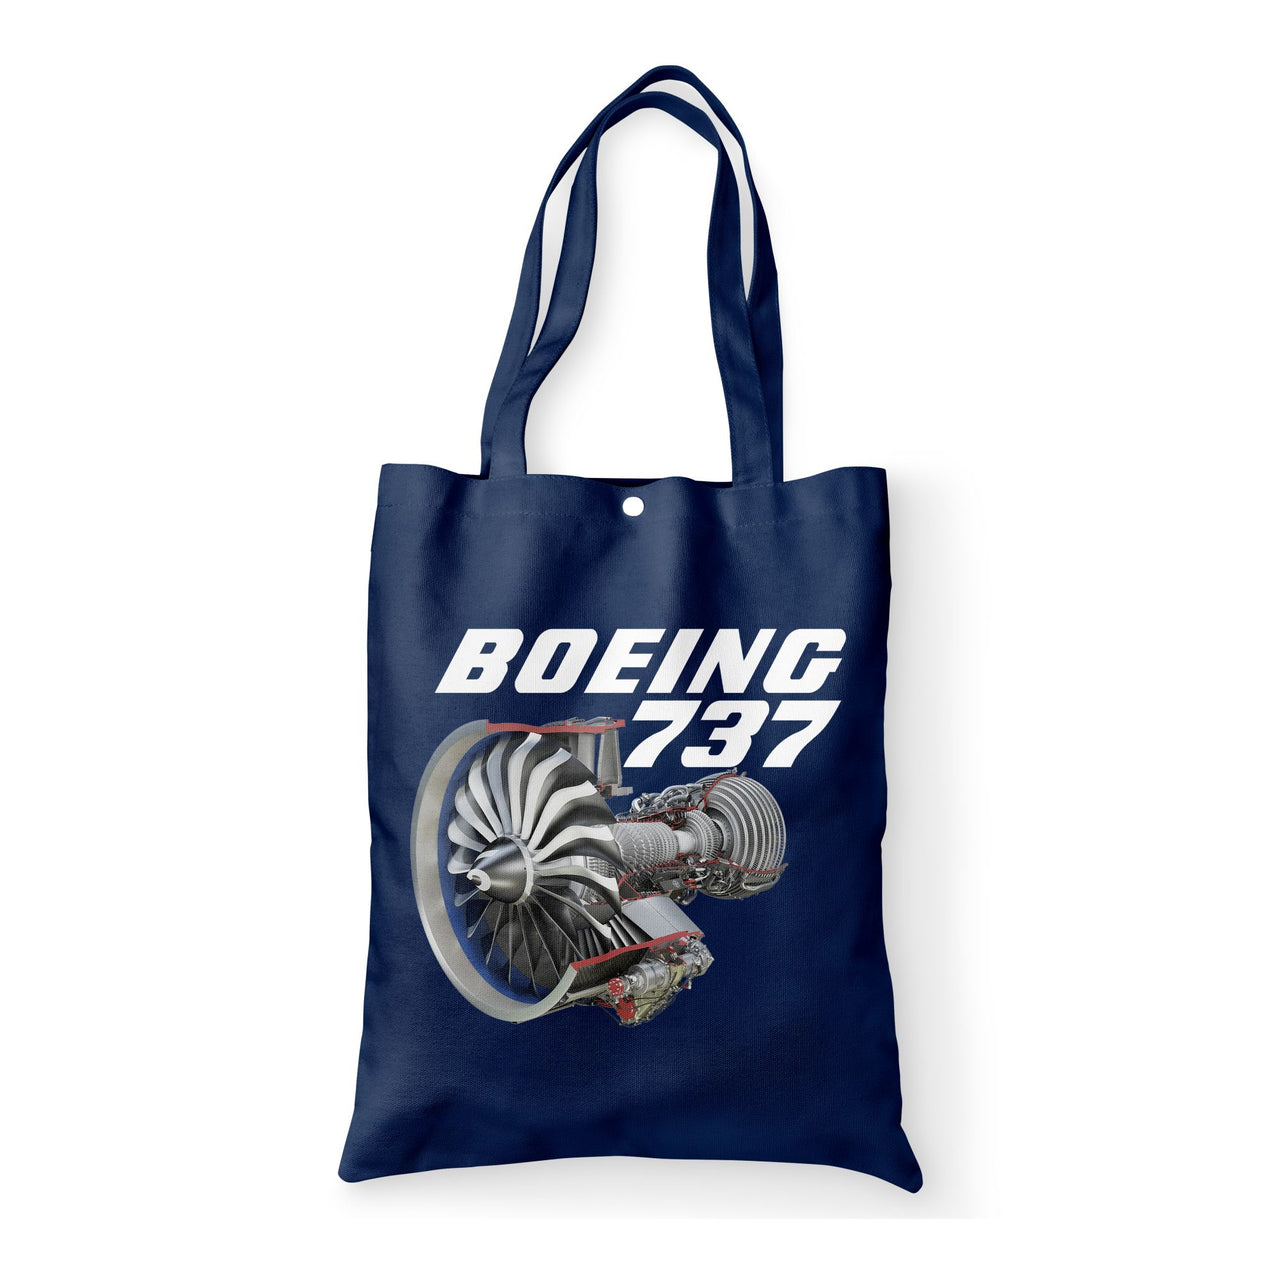 Boeing 737+Text & CFM LEAP-1 Engine Designed Tote Bags